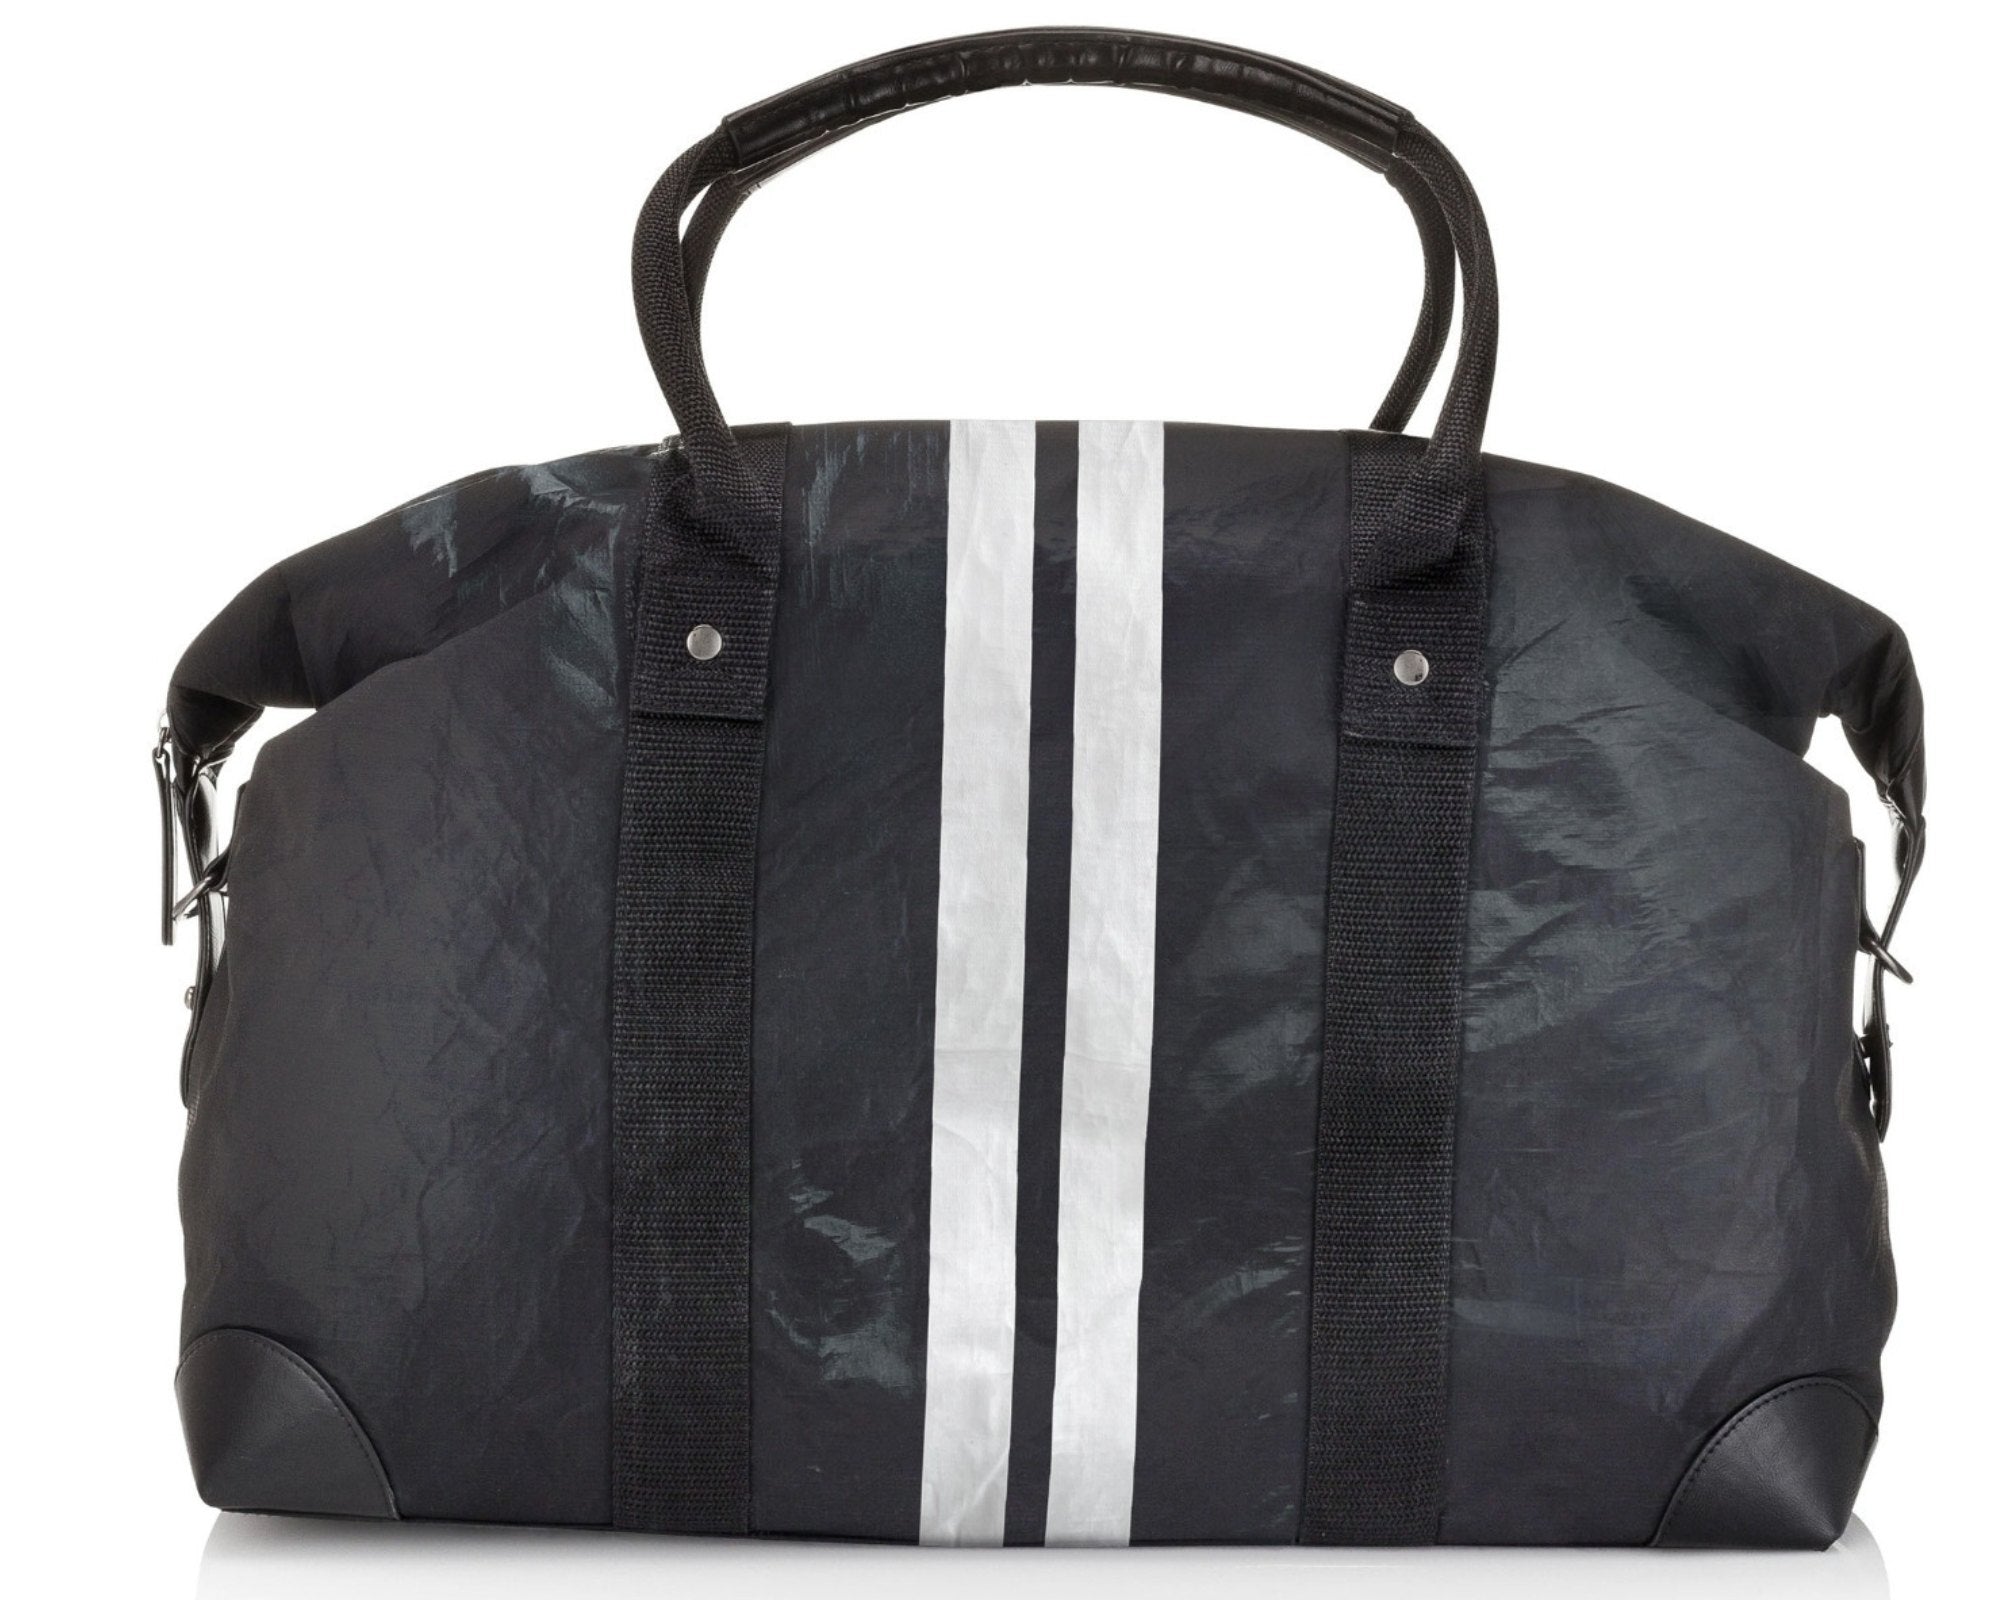 The Weekender Bag in Shimmer Black with White Stripes